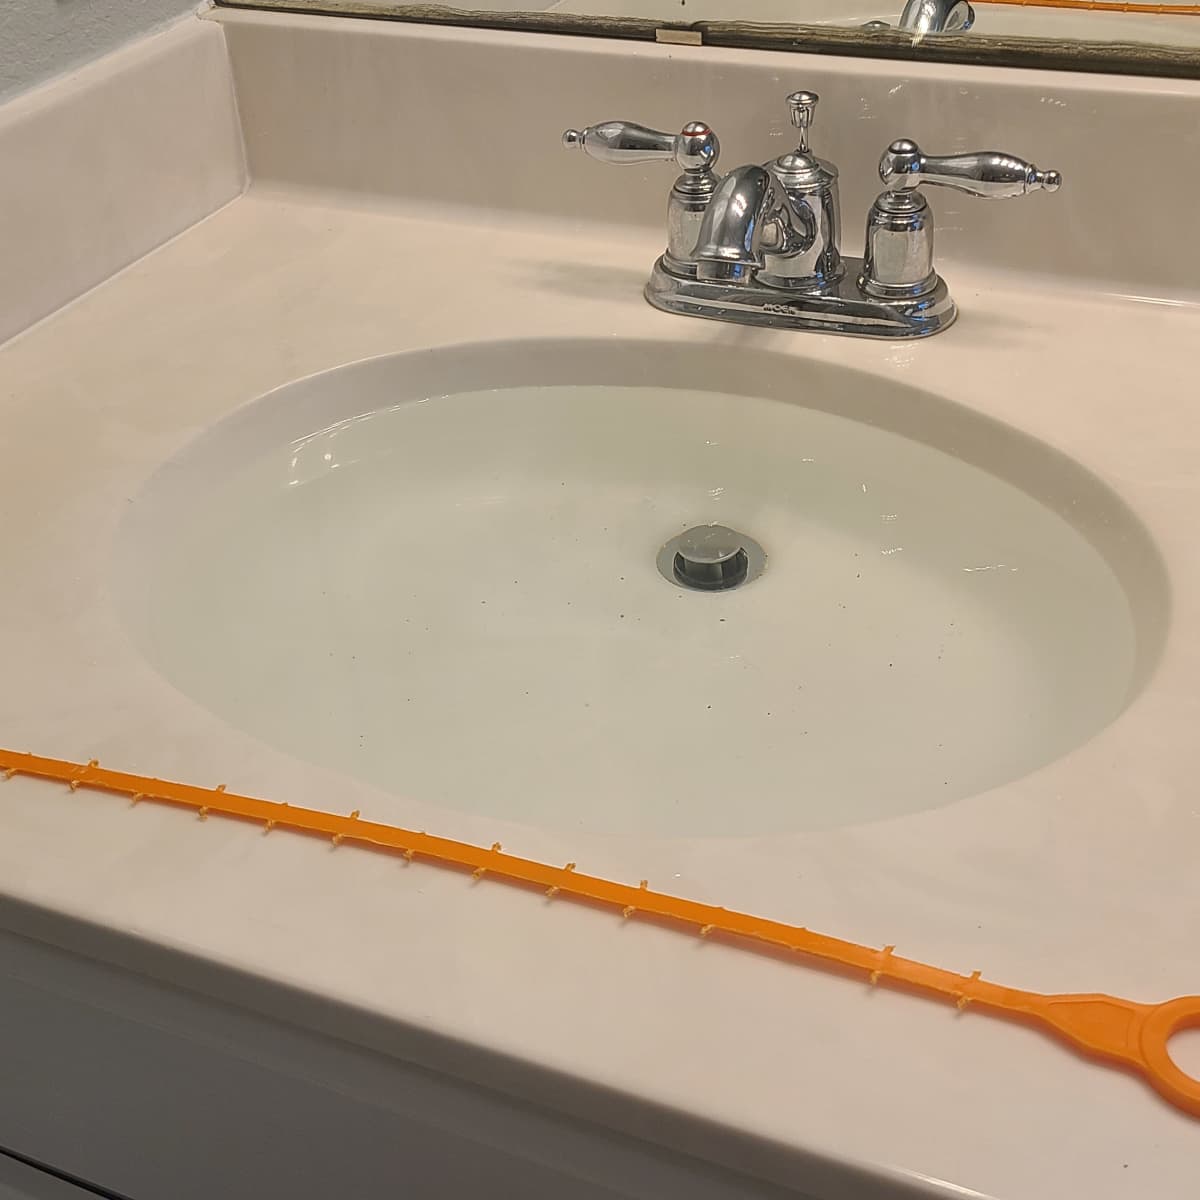 Why is your bathroom sink clogging?